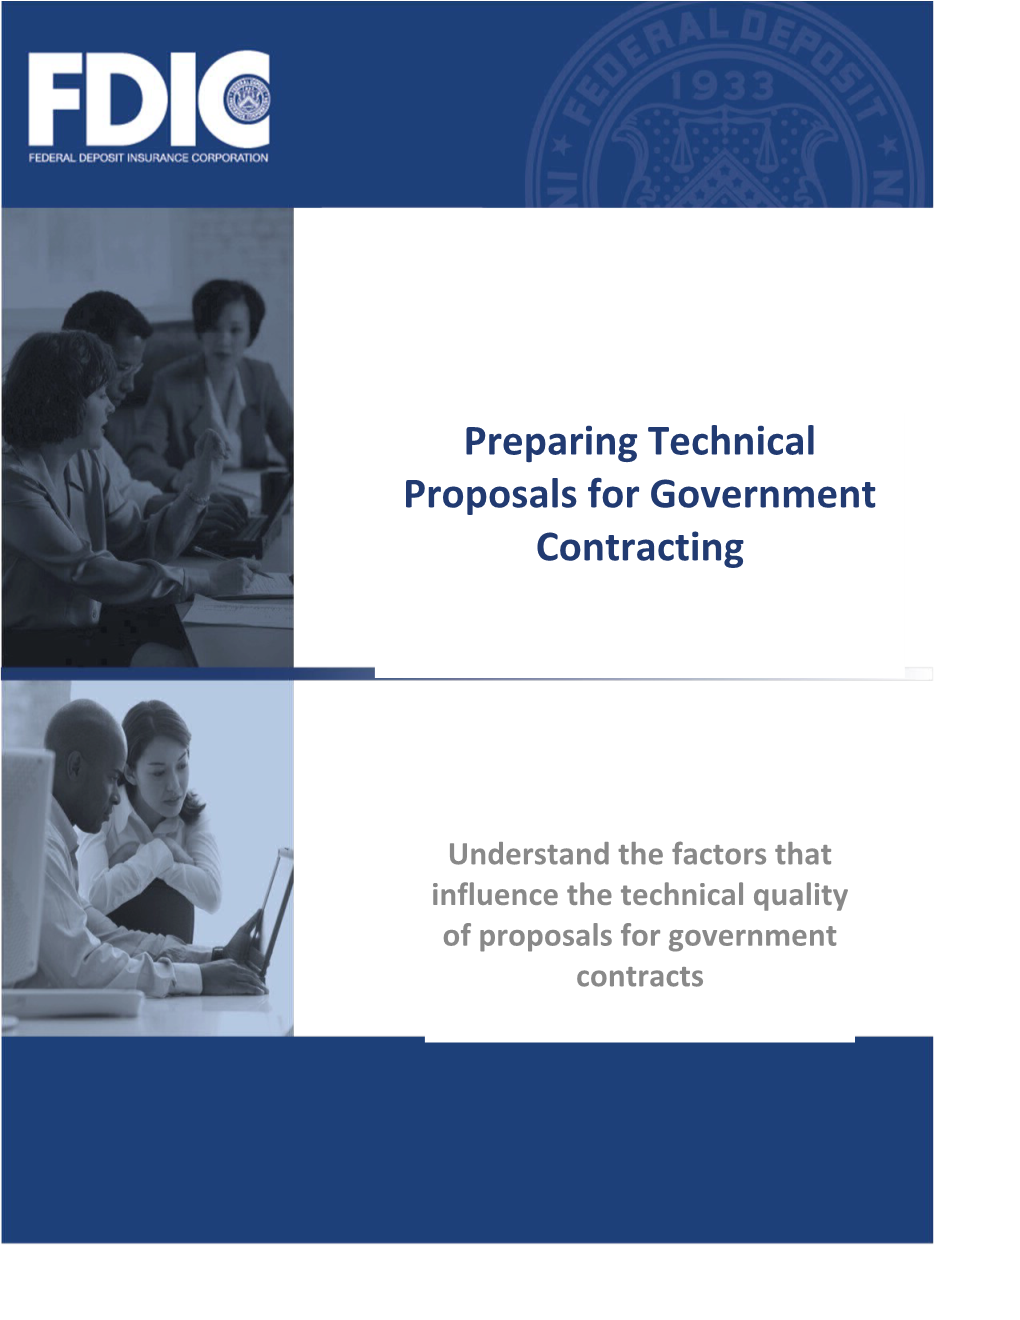 5-3 Preparing Technical Proposals for Government Contracting